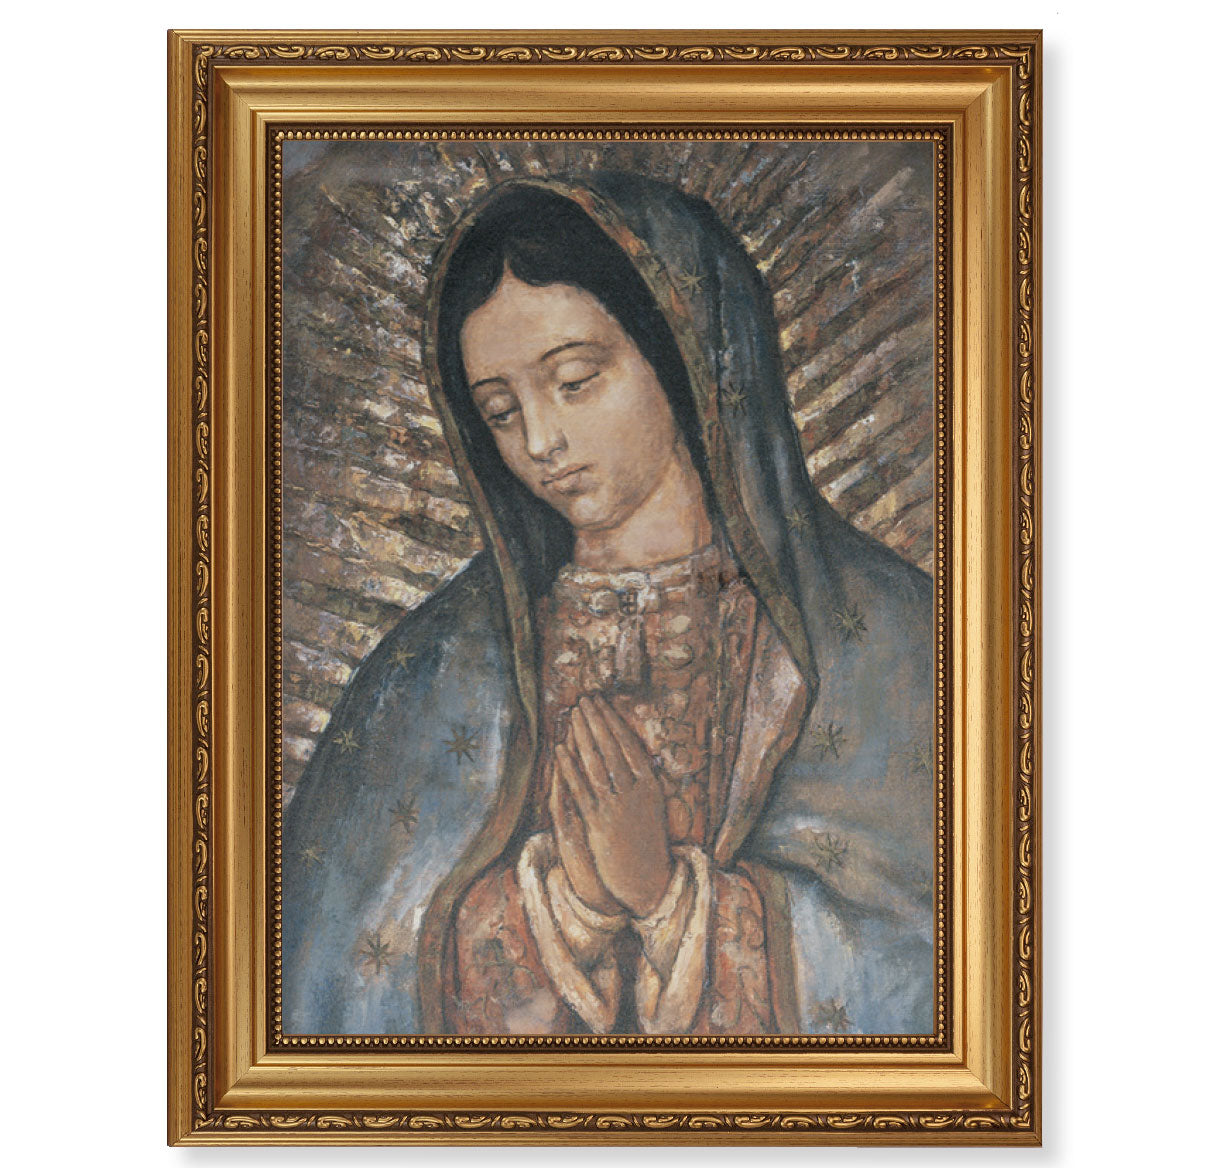 Our Lady of Guadalupe Gold Wood Framed Canvas Art